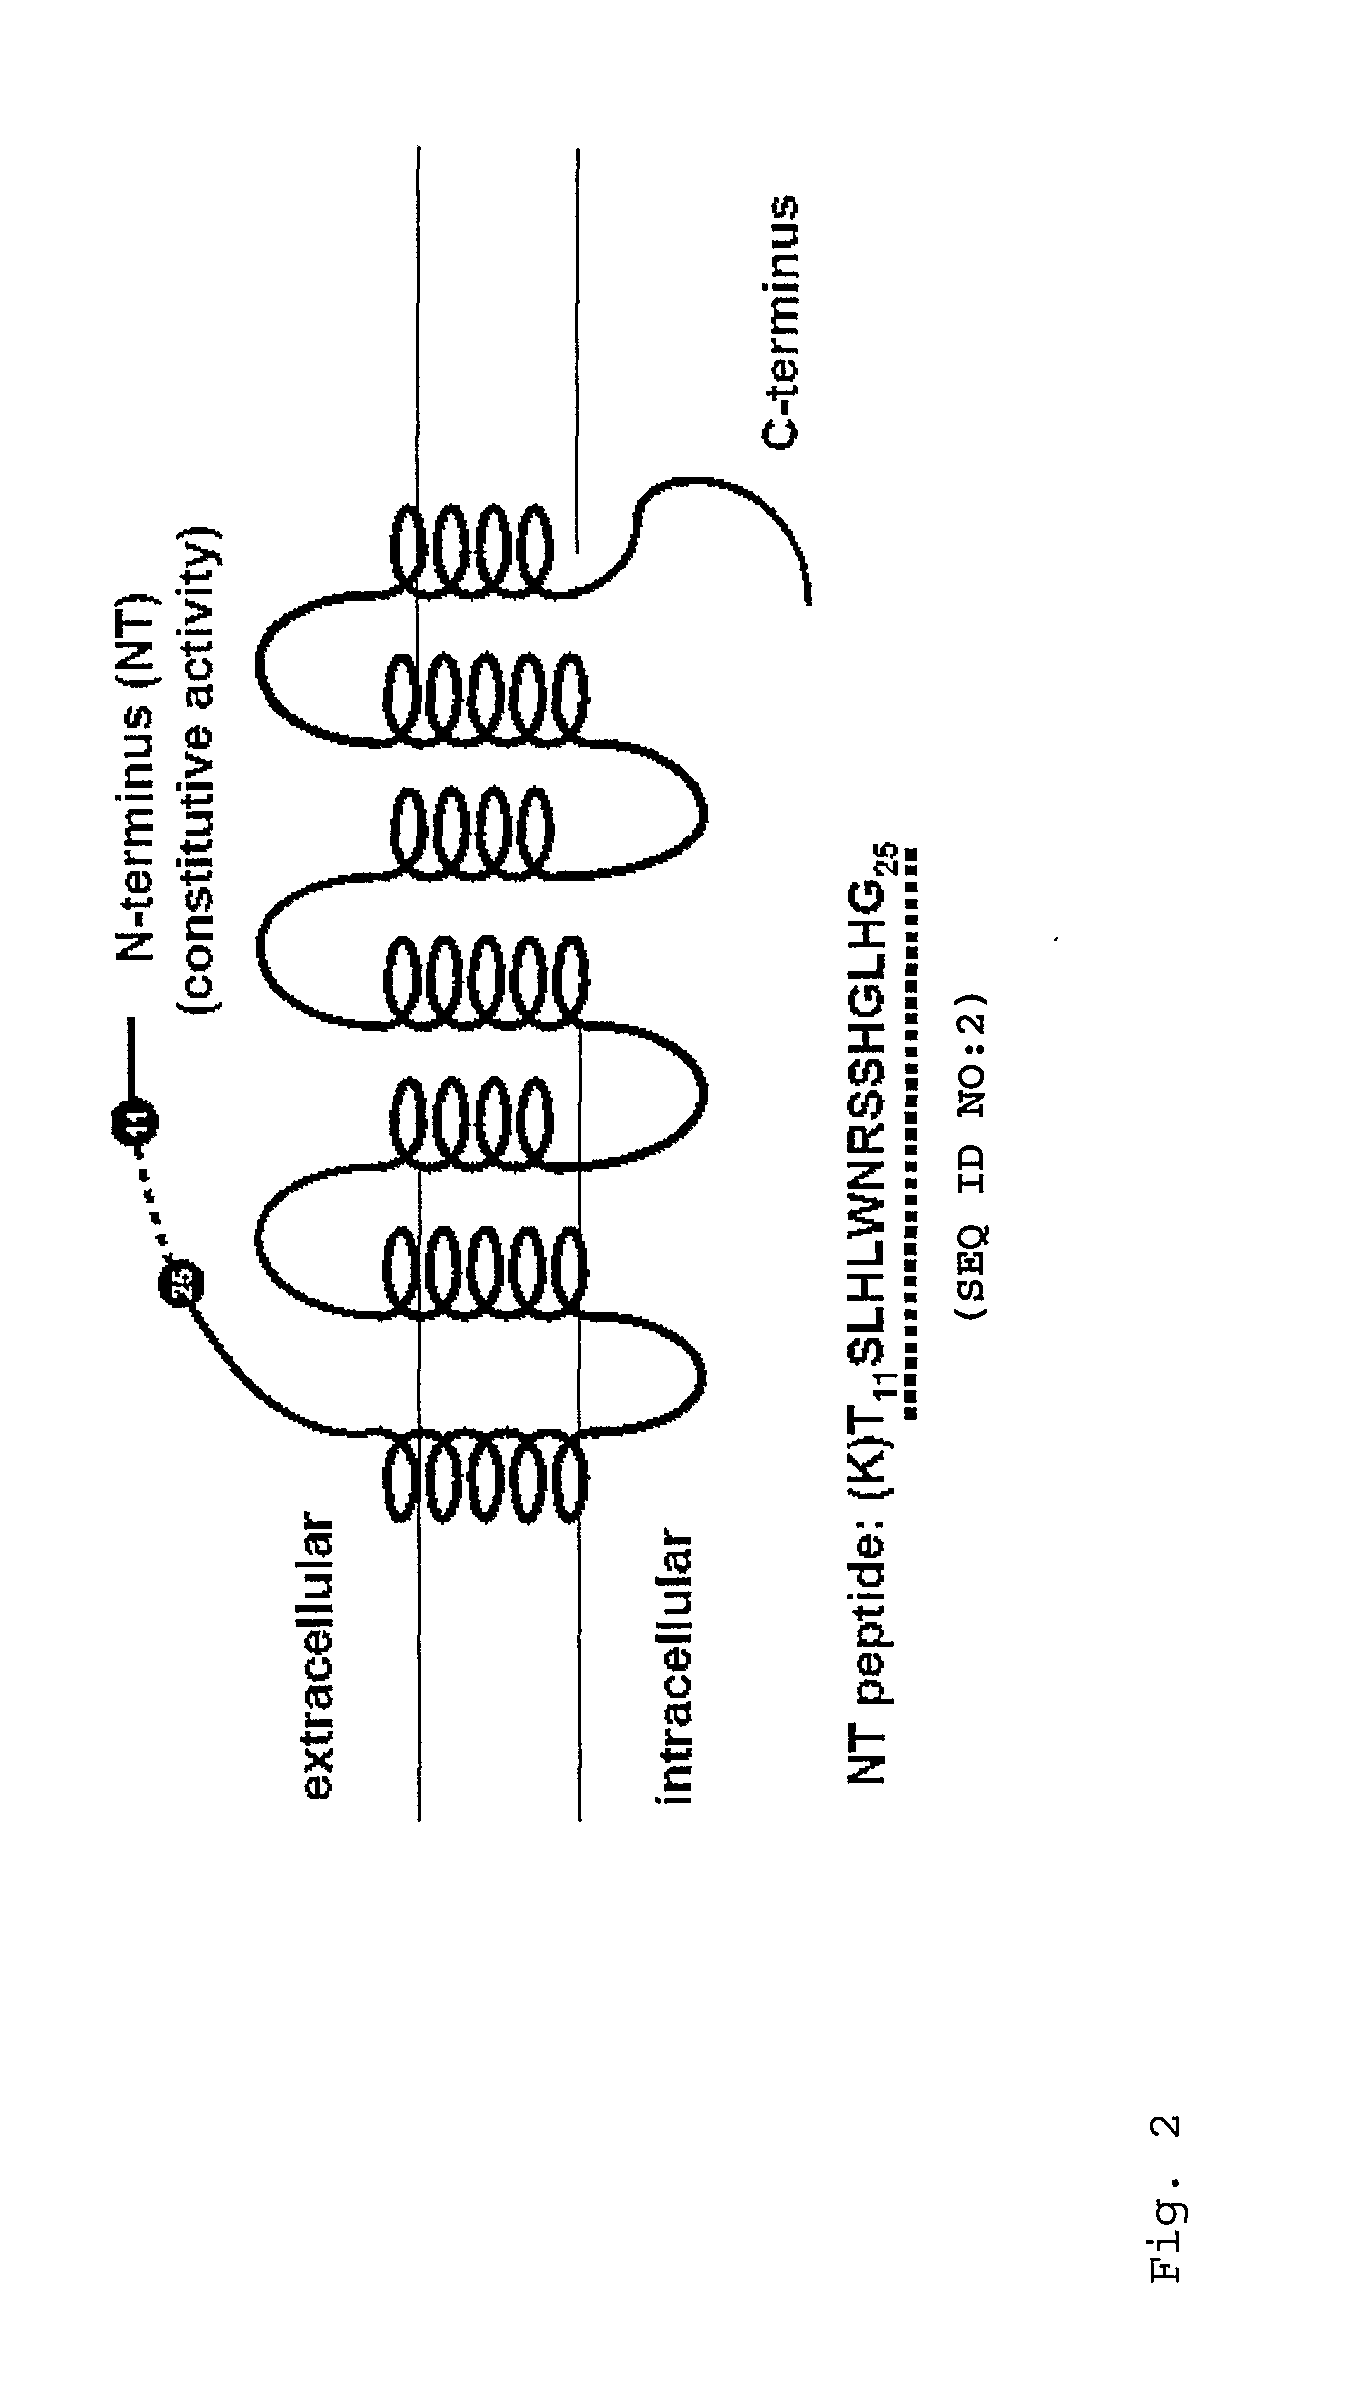 Monoclonal antibodies and binding fragments thereof directed to the melanocortin-4 receptor and their use in the treatment of cachexia and related conditions and diseases